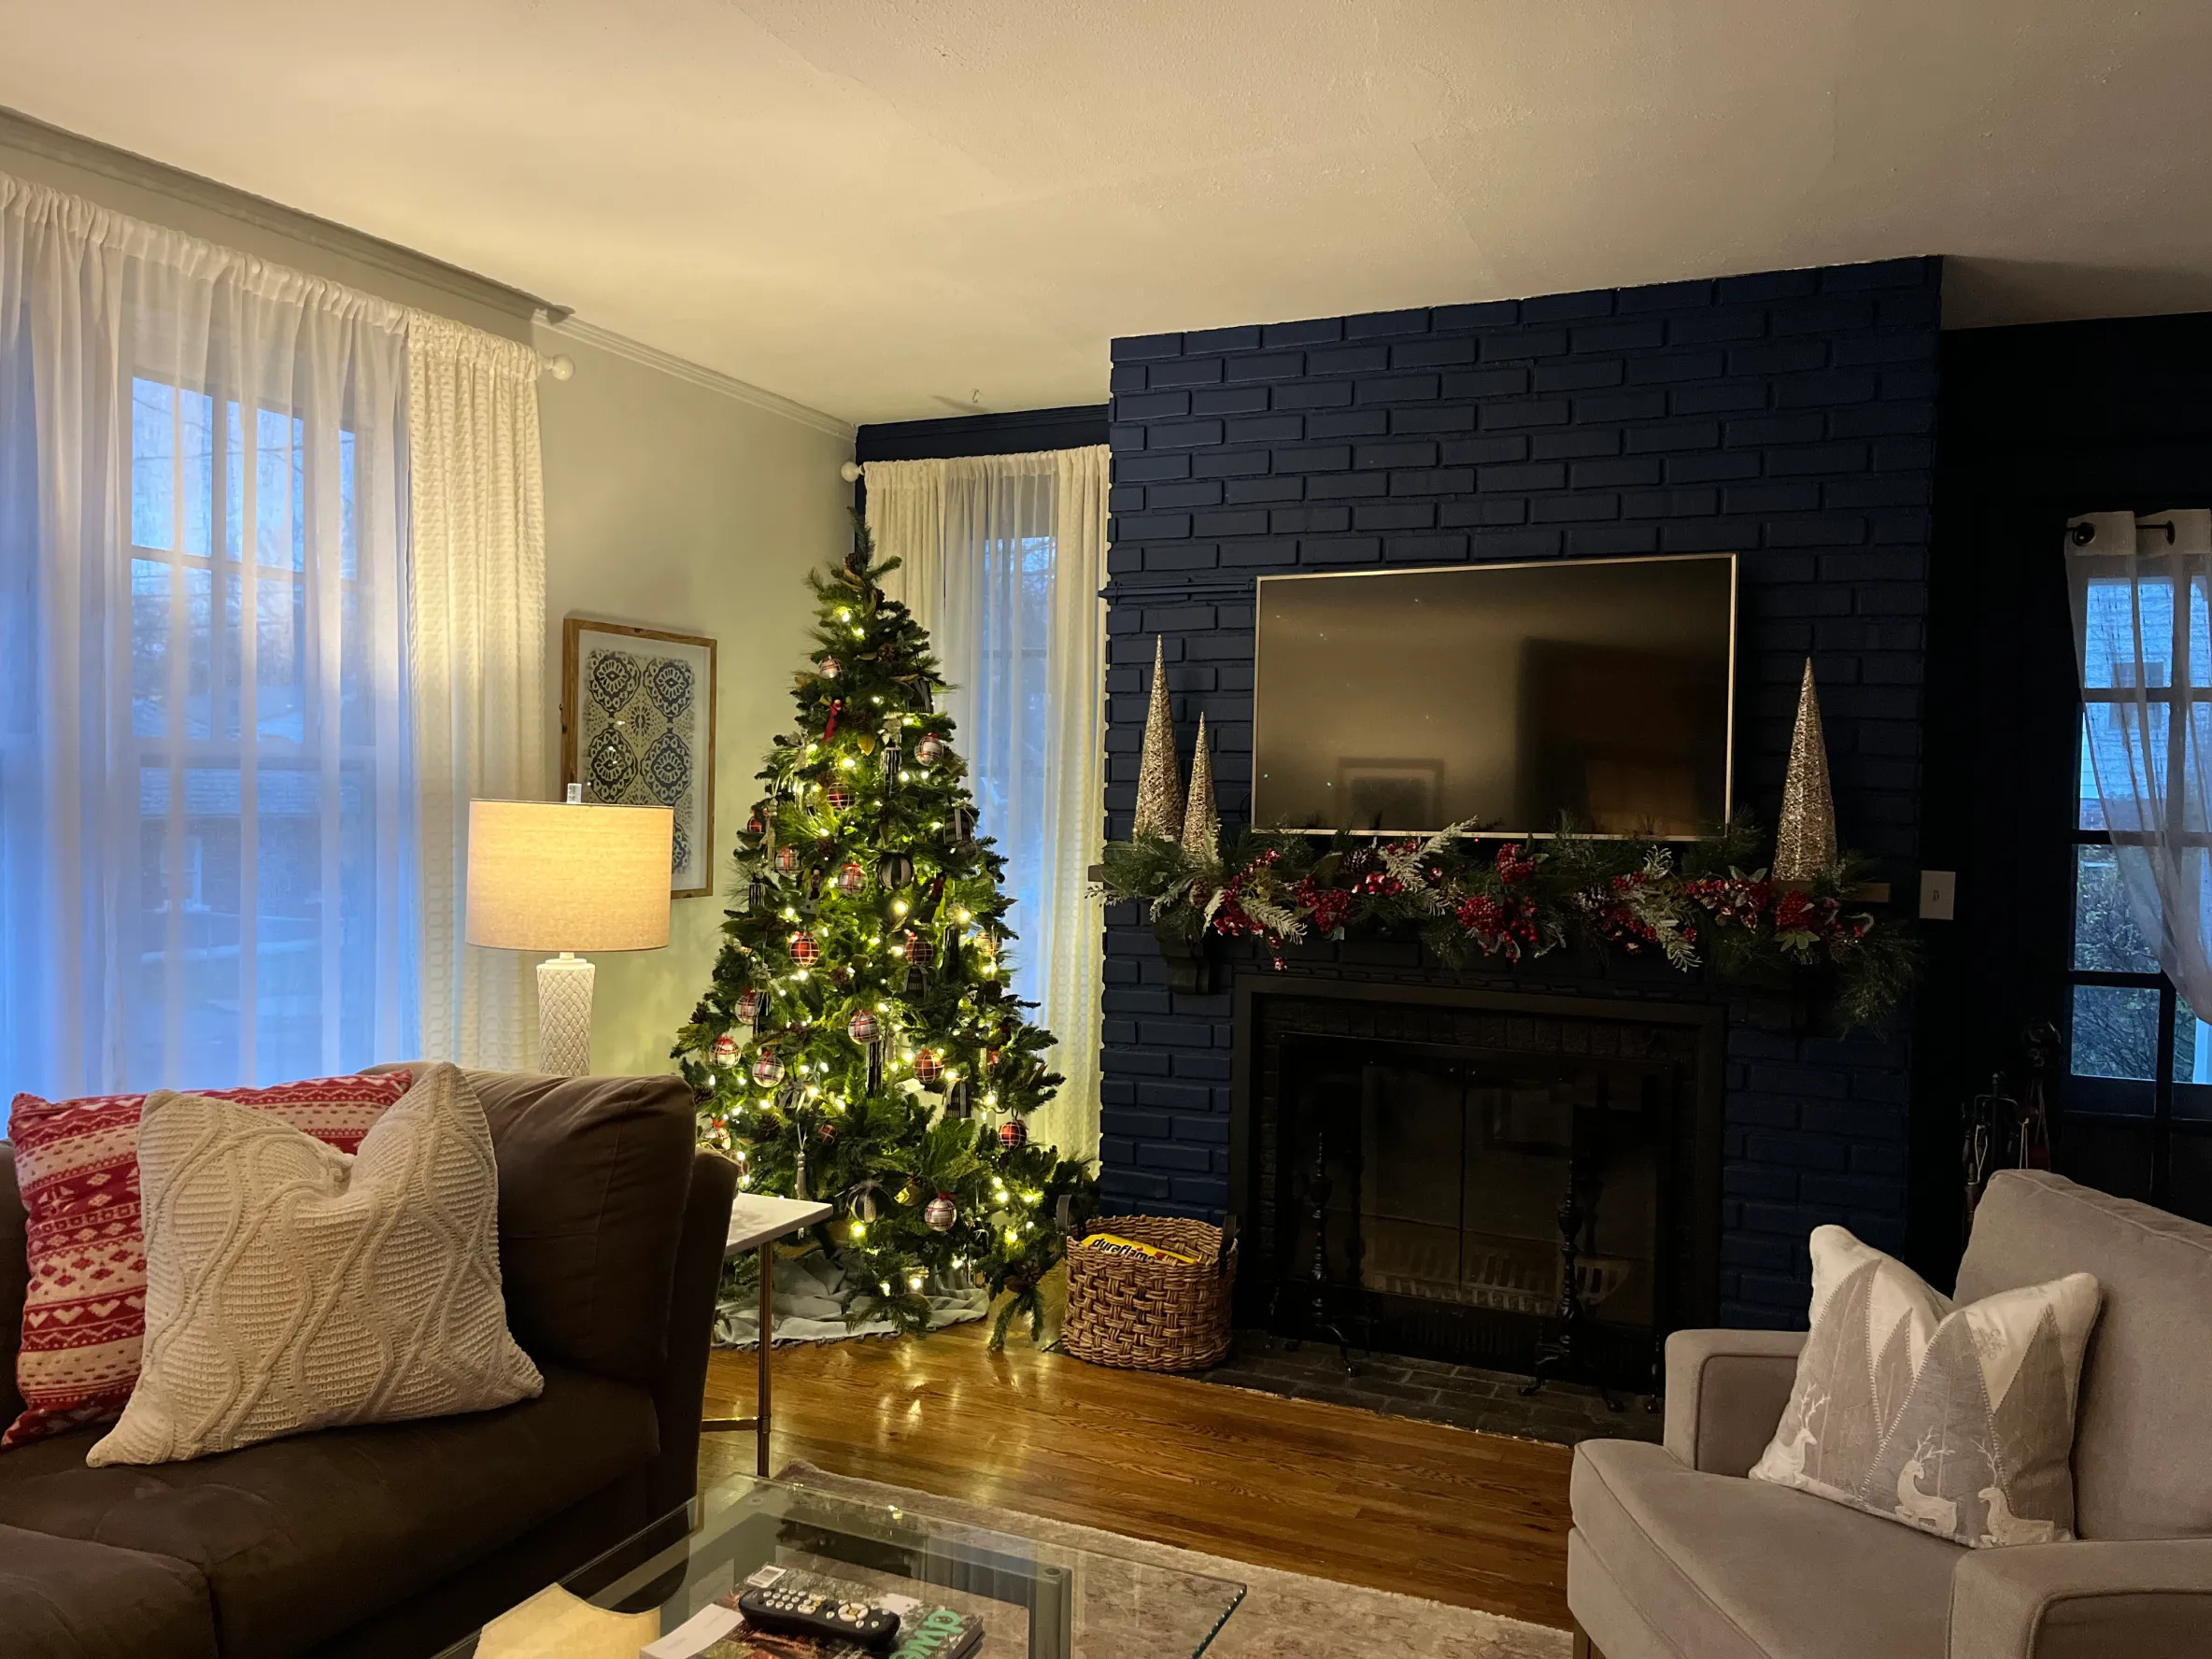 Well-lit room with a green Christmas tree with lights, a curtain-covered window, a red couch and a brown dresser